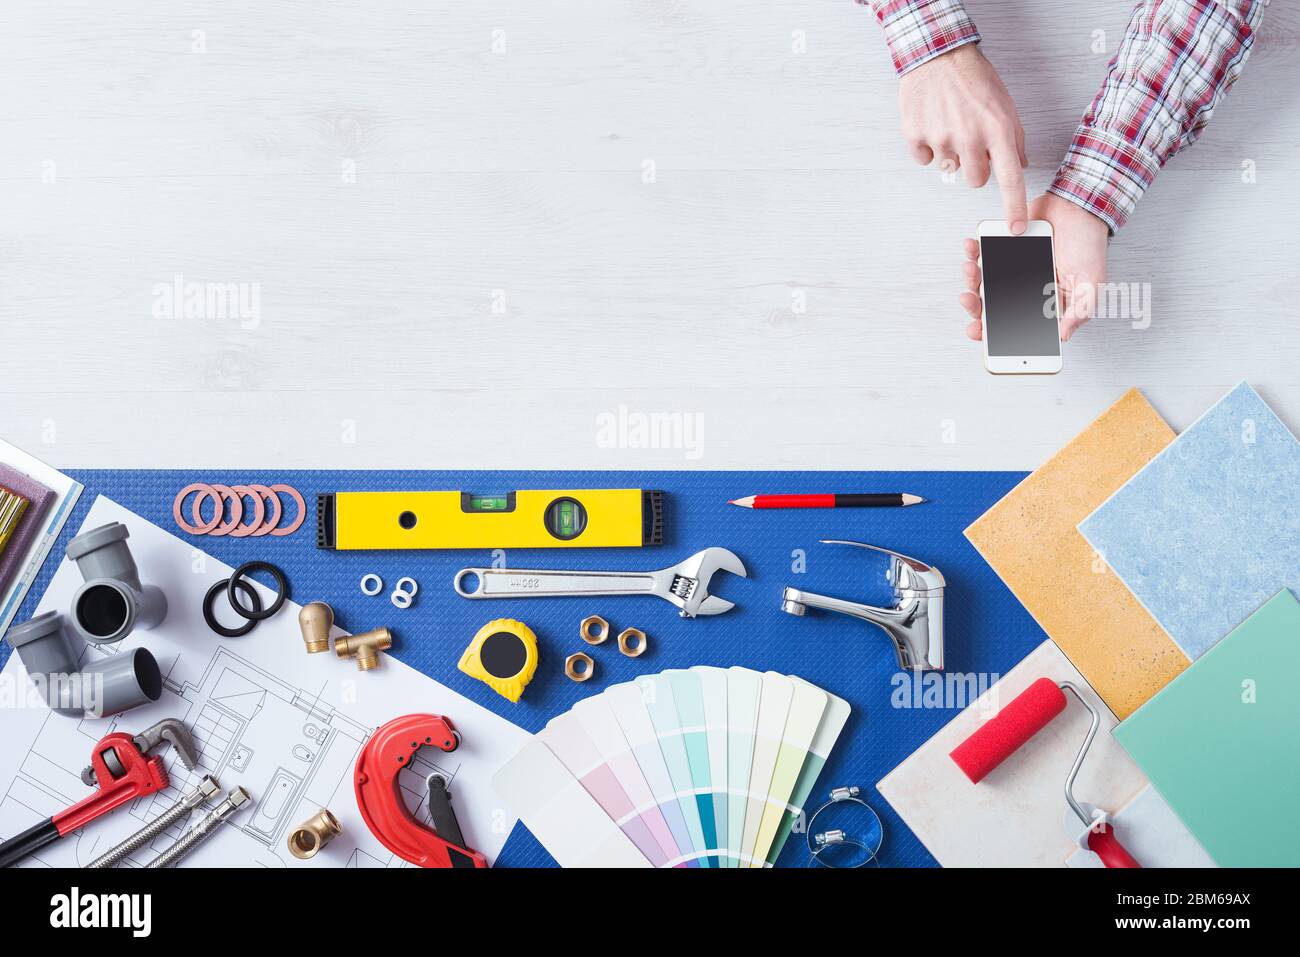 Male hands using a mobile phone next to plumbing work tools, tiles and swatches, online booking and home plumbing service Stock Photo